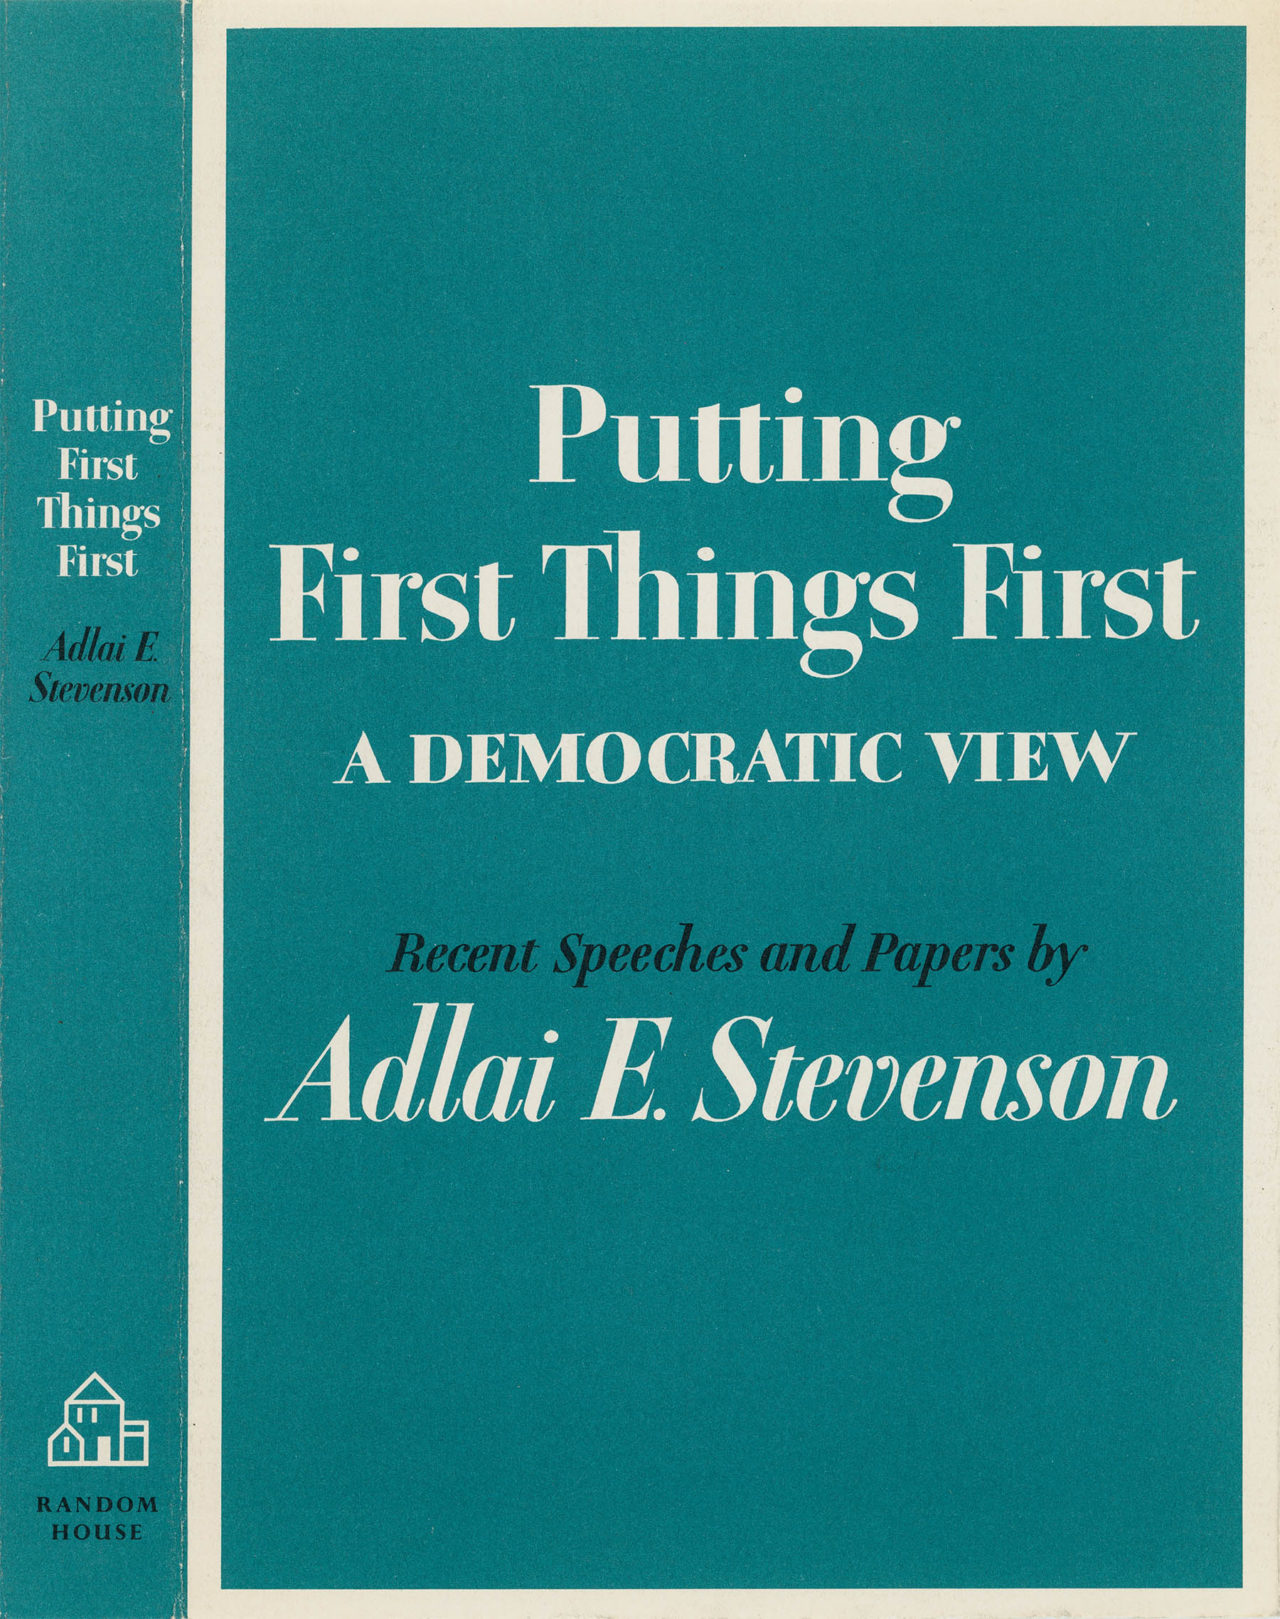 Book jacket of Putting Things First